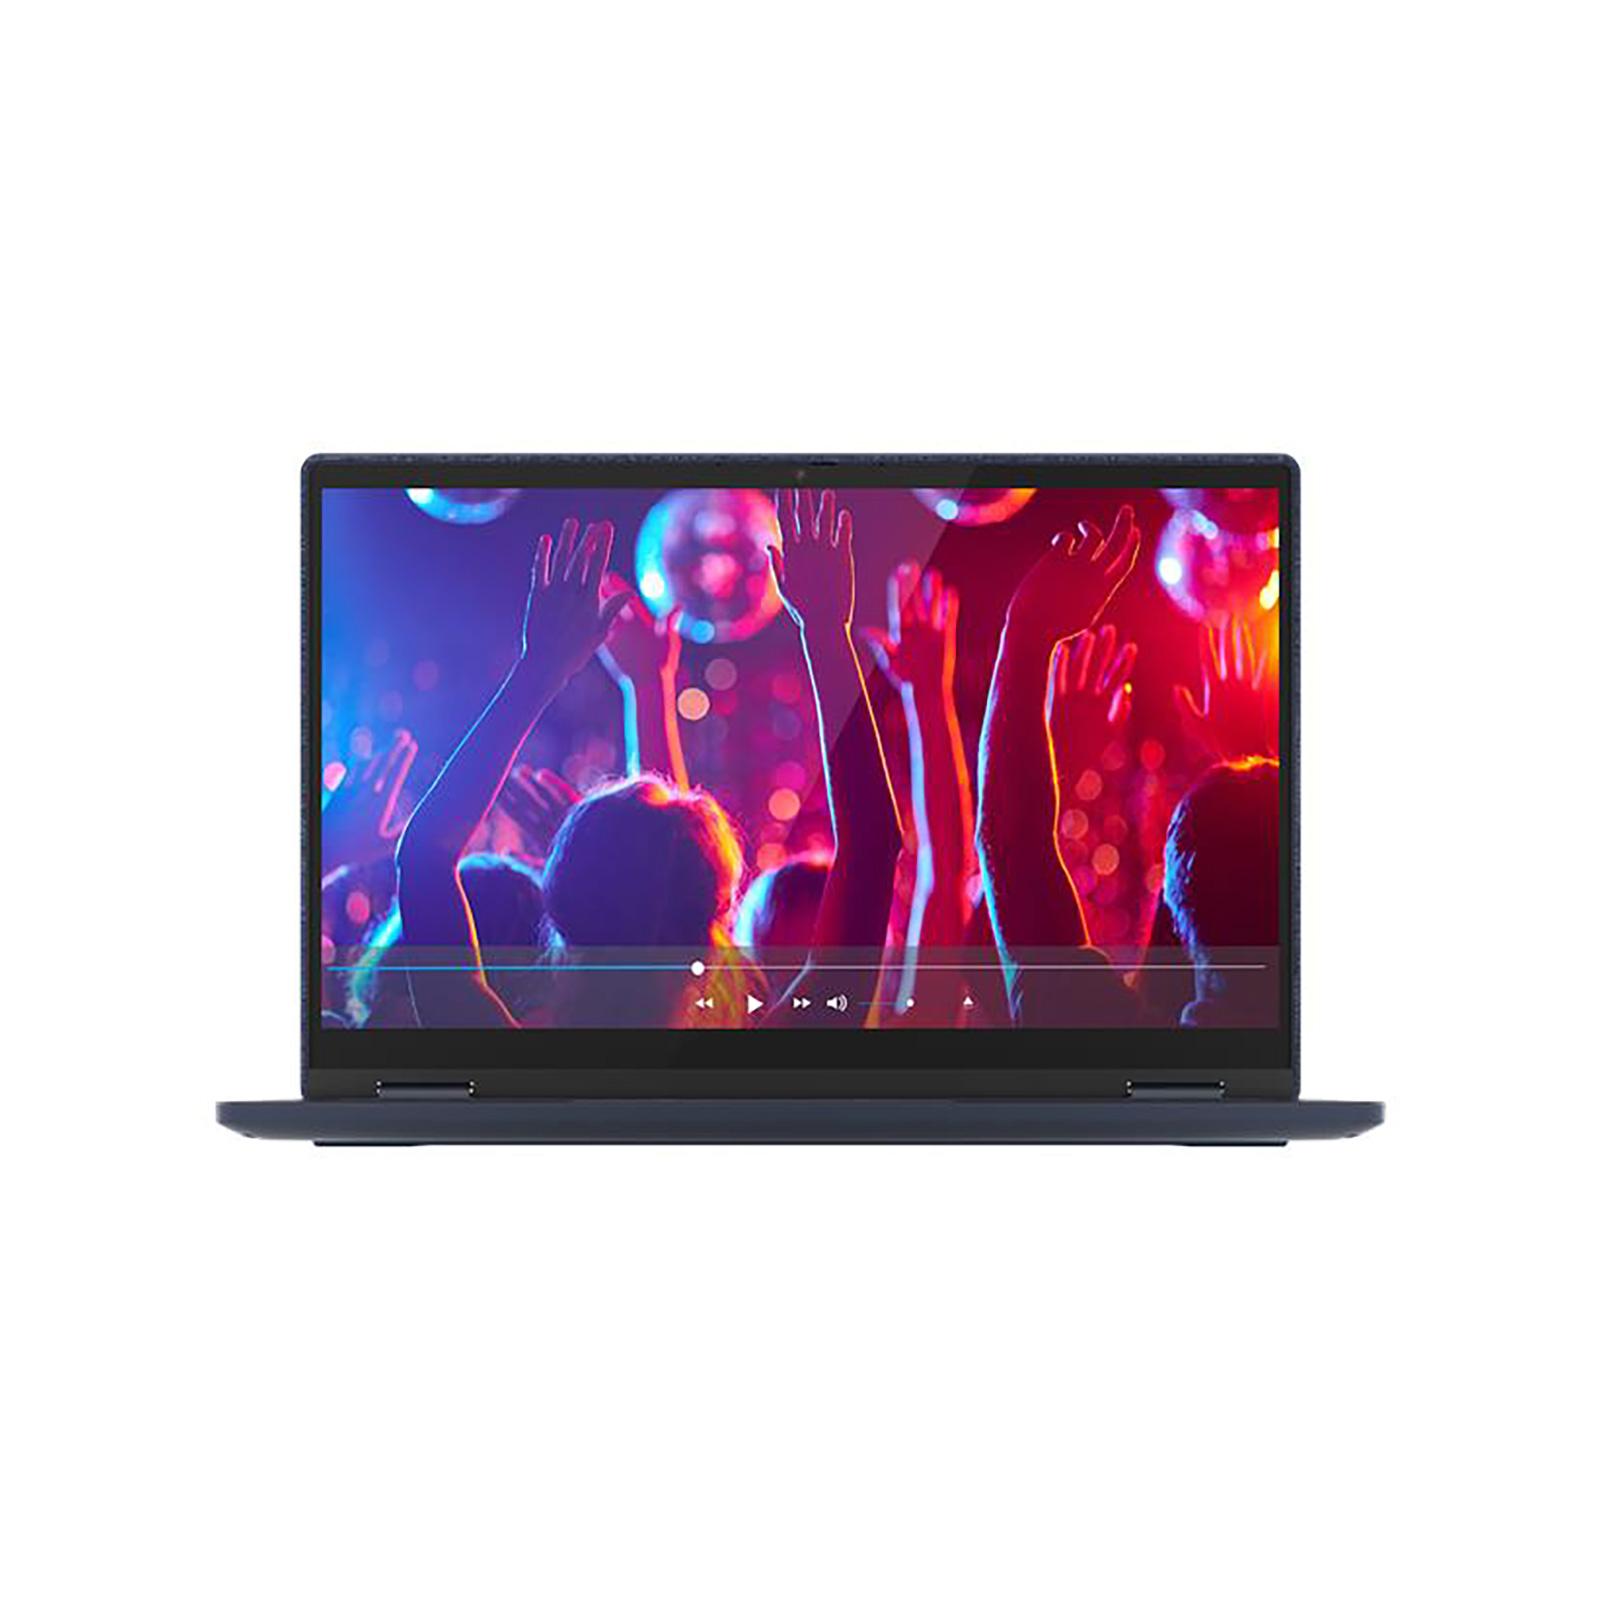 Lenovo-82ND007BSA-Lenovo-82ND007BSA-82ND007BSA-Laptops | LaptopSA.co.za a division of the notebook company 